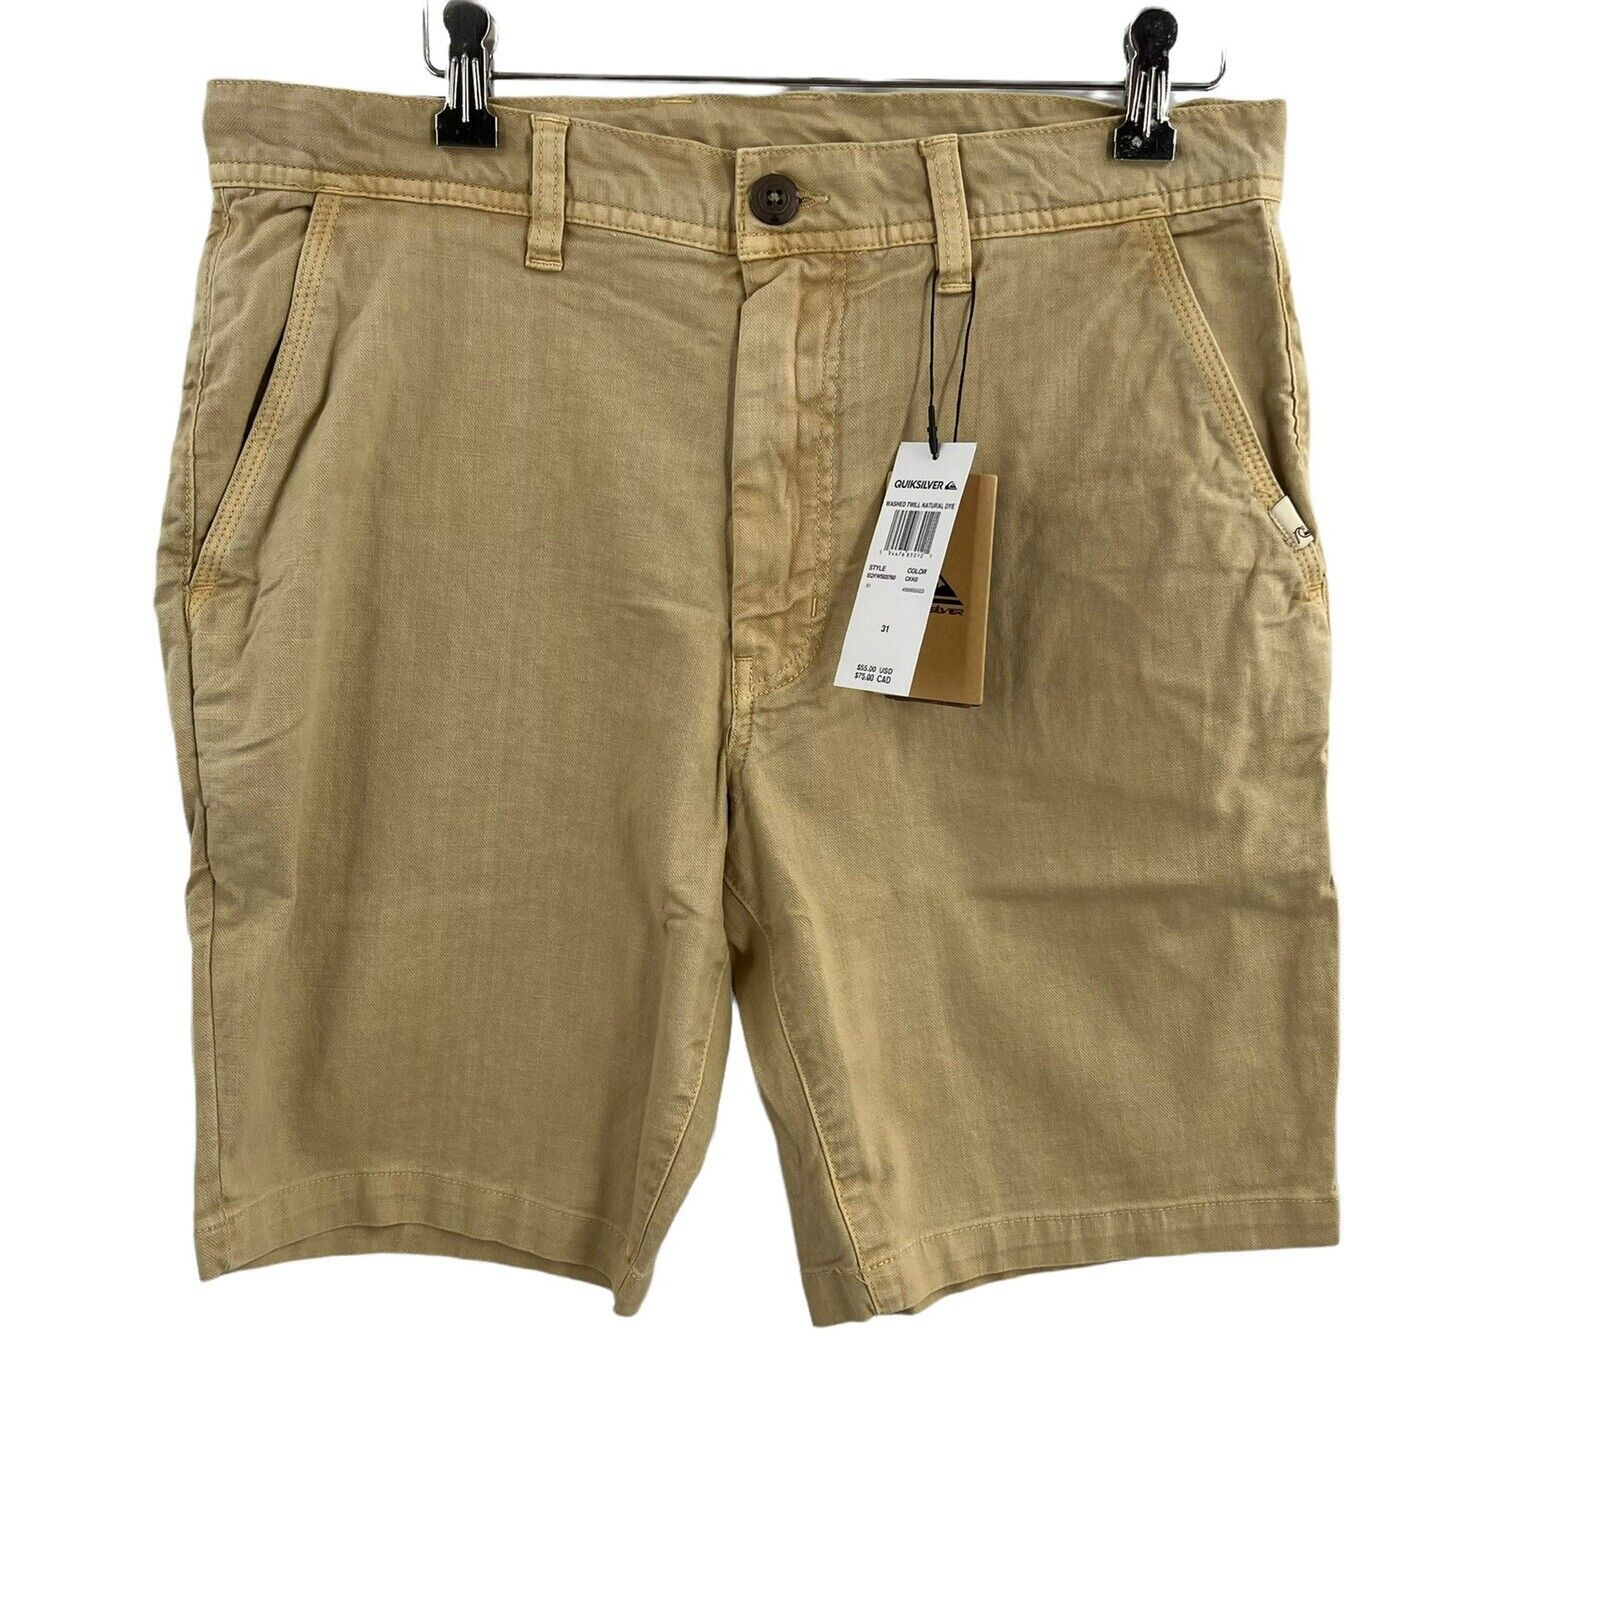 Primary image for Quicksilver Washed Twill Natural Dye Shorts Size 31 New